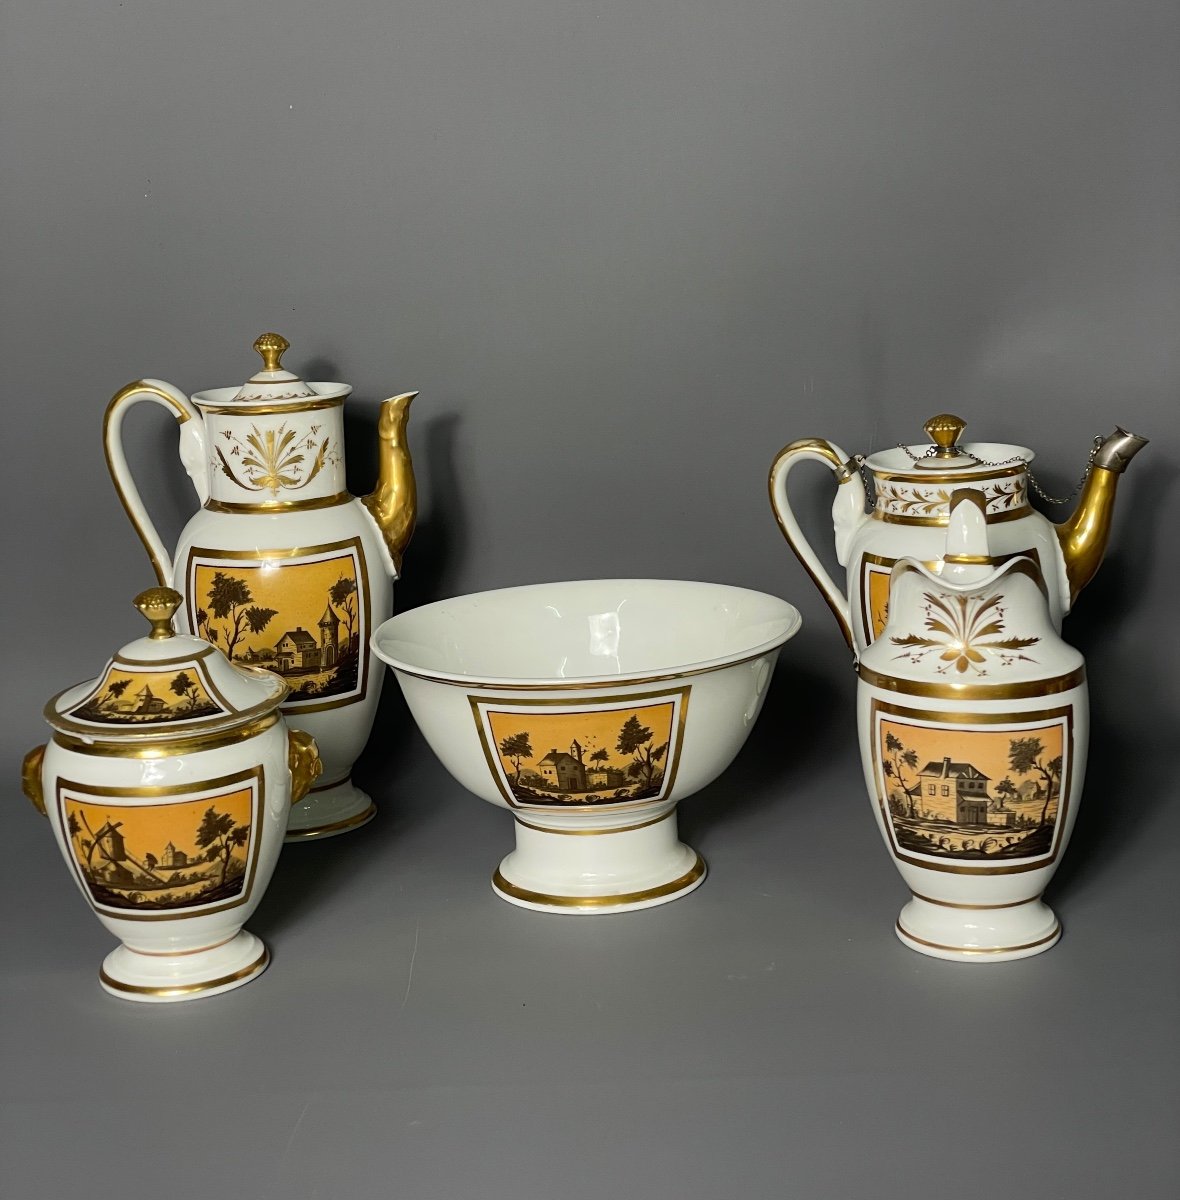 Coffee Service Was From The Empire Period In Porcelain -photo-5